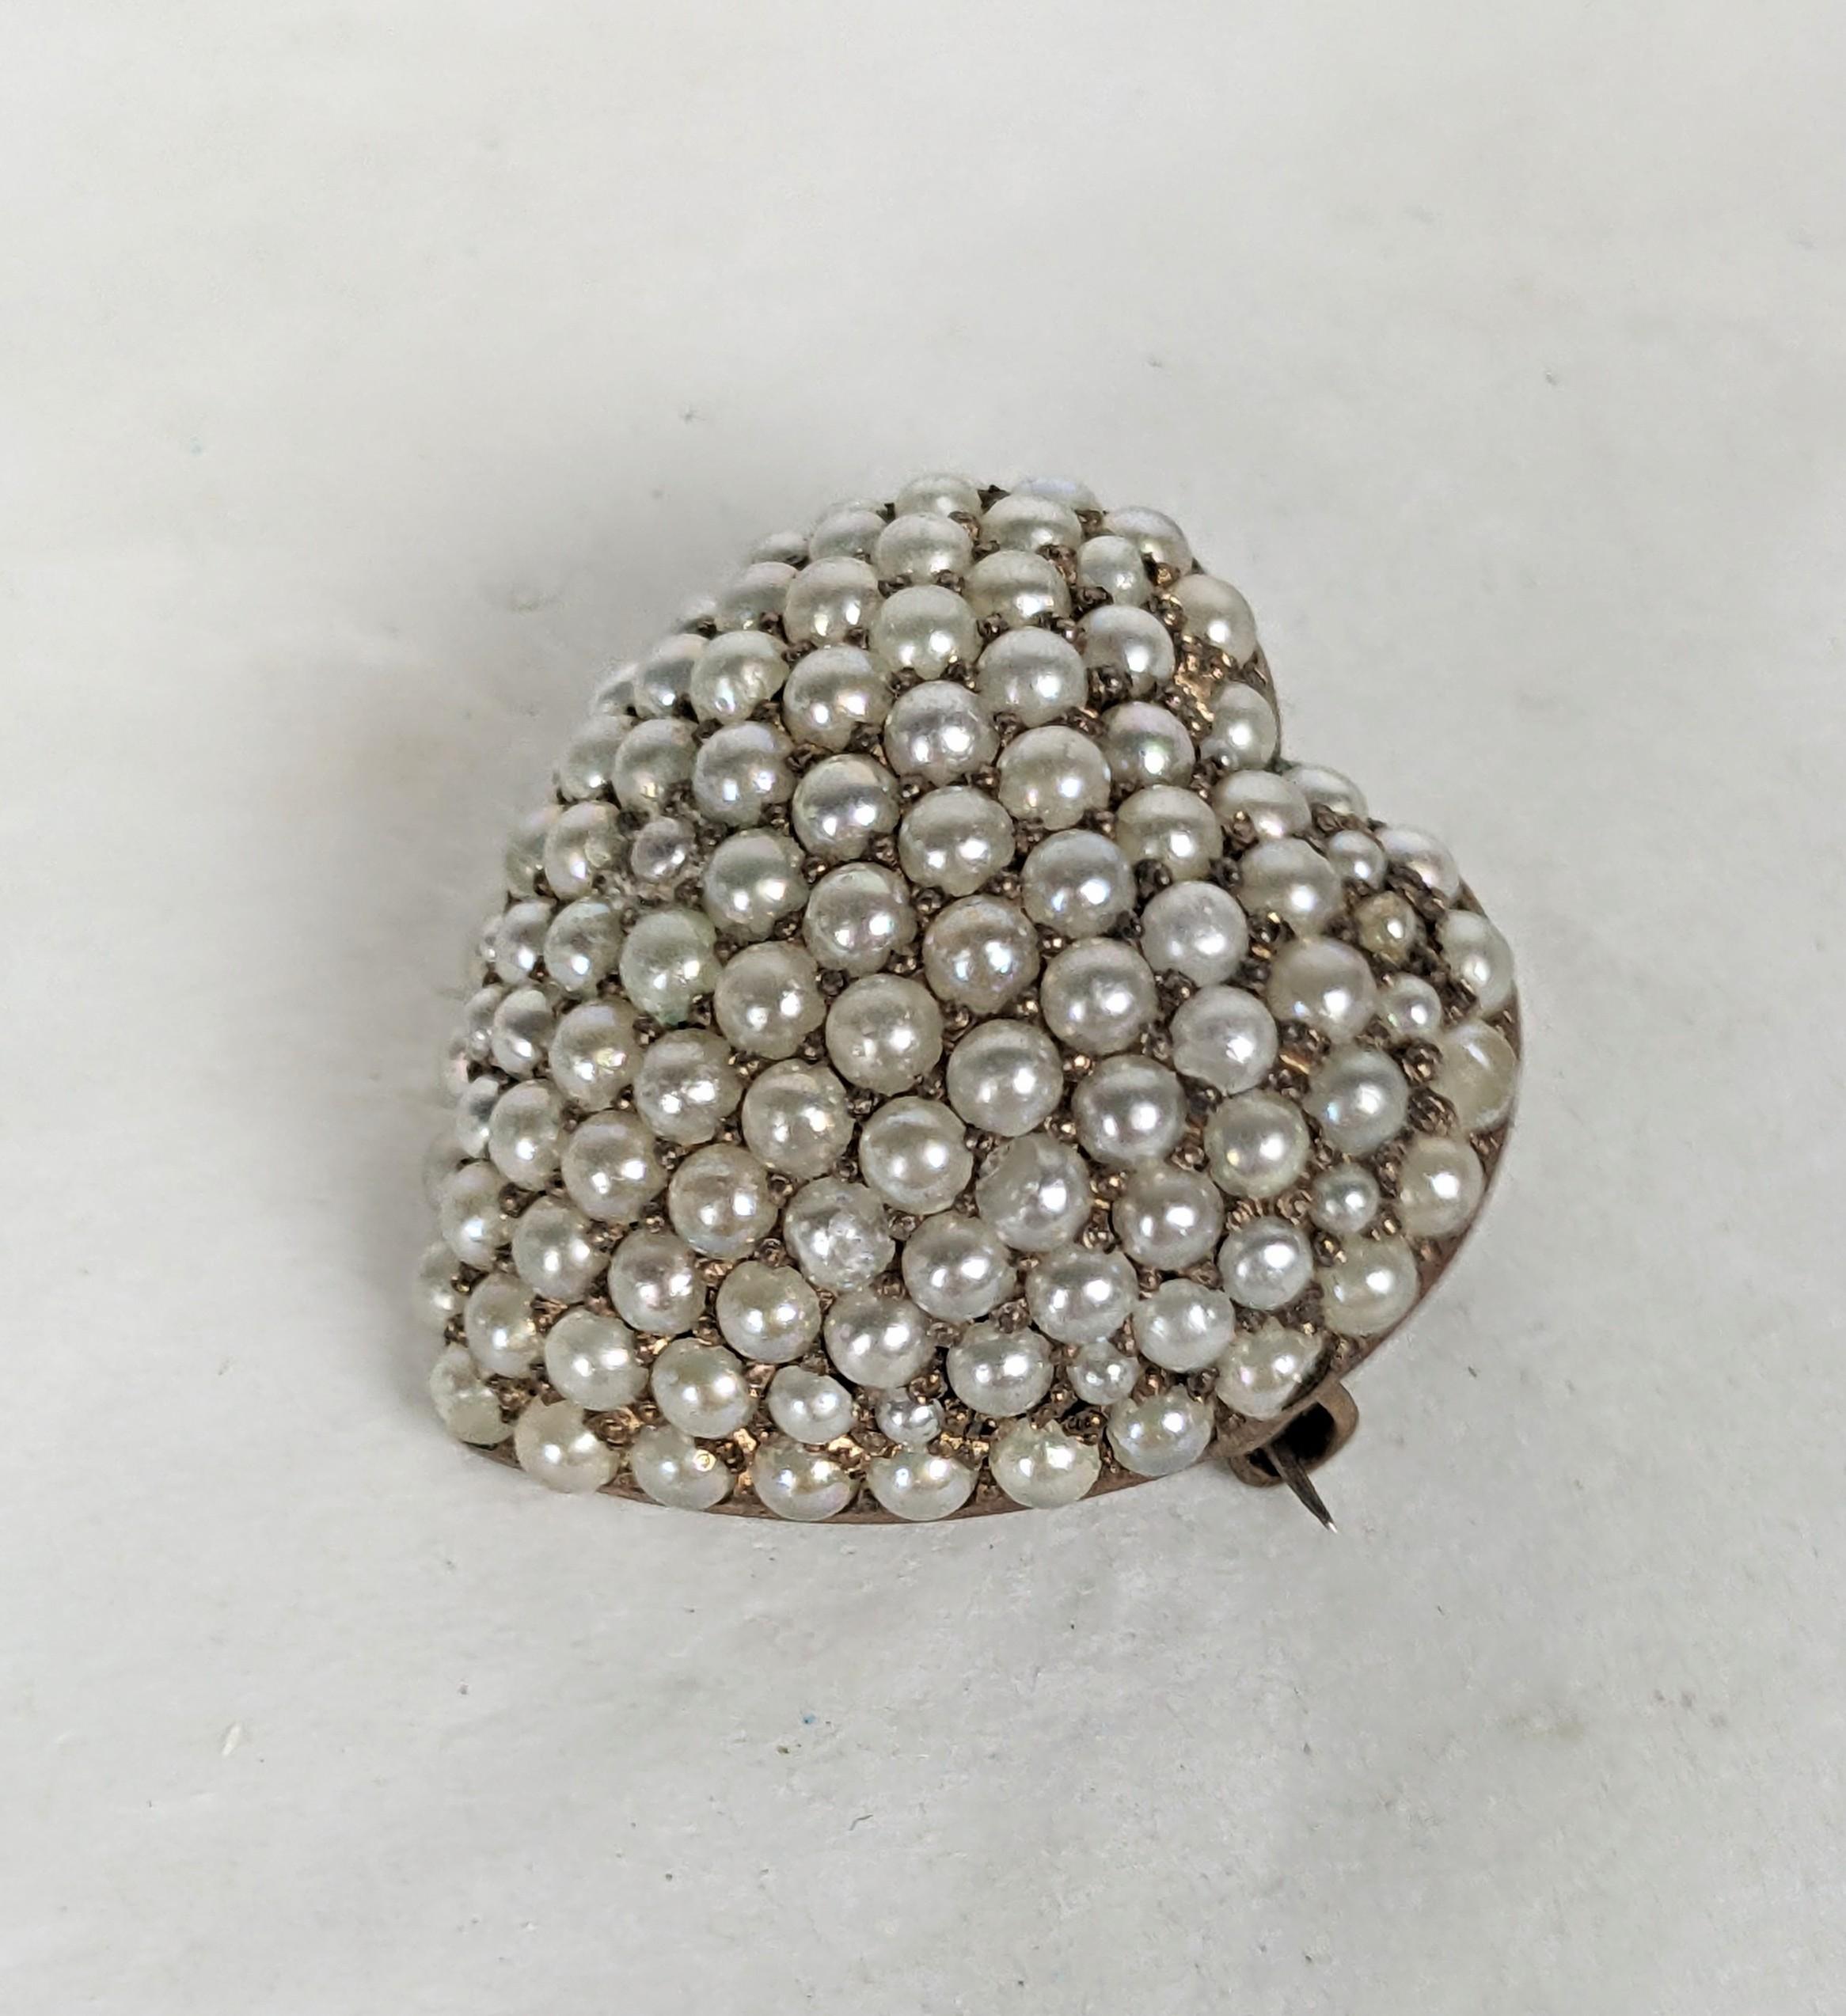 Puffy Victorian Seed Pearl Brooch-Pendant from the late 1900's. Set in sterling with pave seed pearls. Some are set with natural pearls but these are glass. 1900 USA. Marked Sterling. approx 1